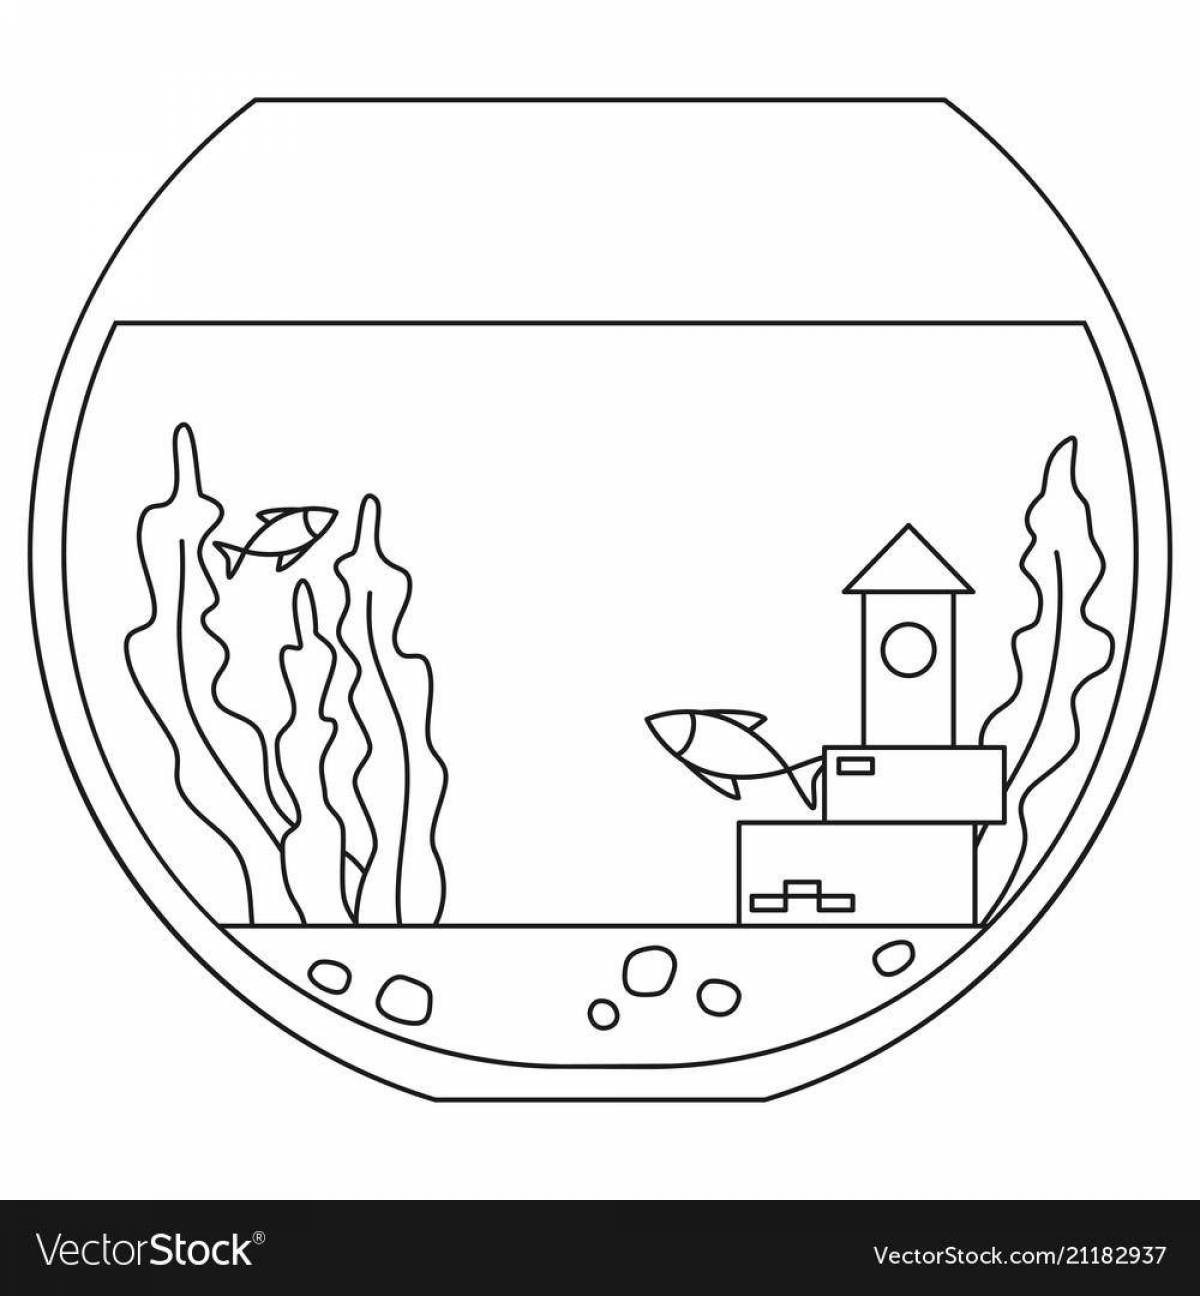 Adorable blank aquarium coloring page for kids